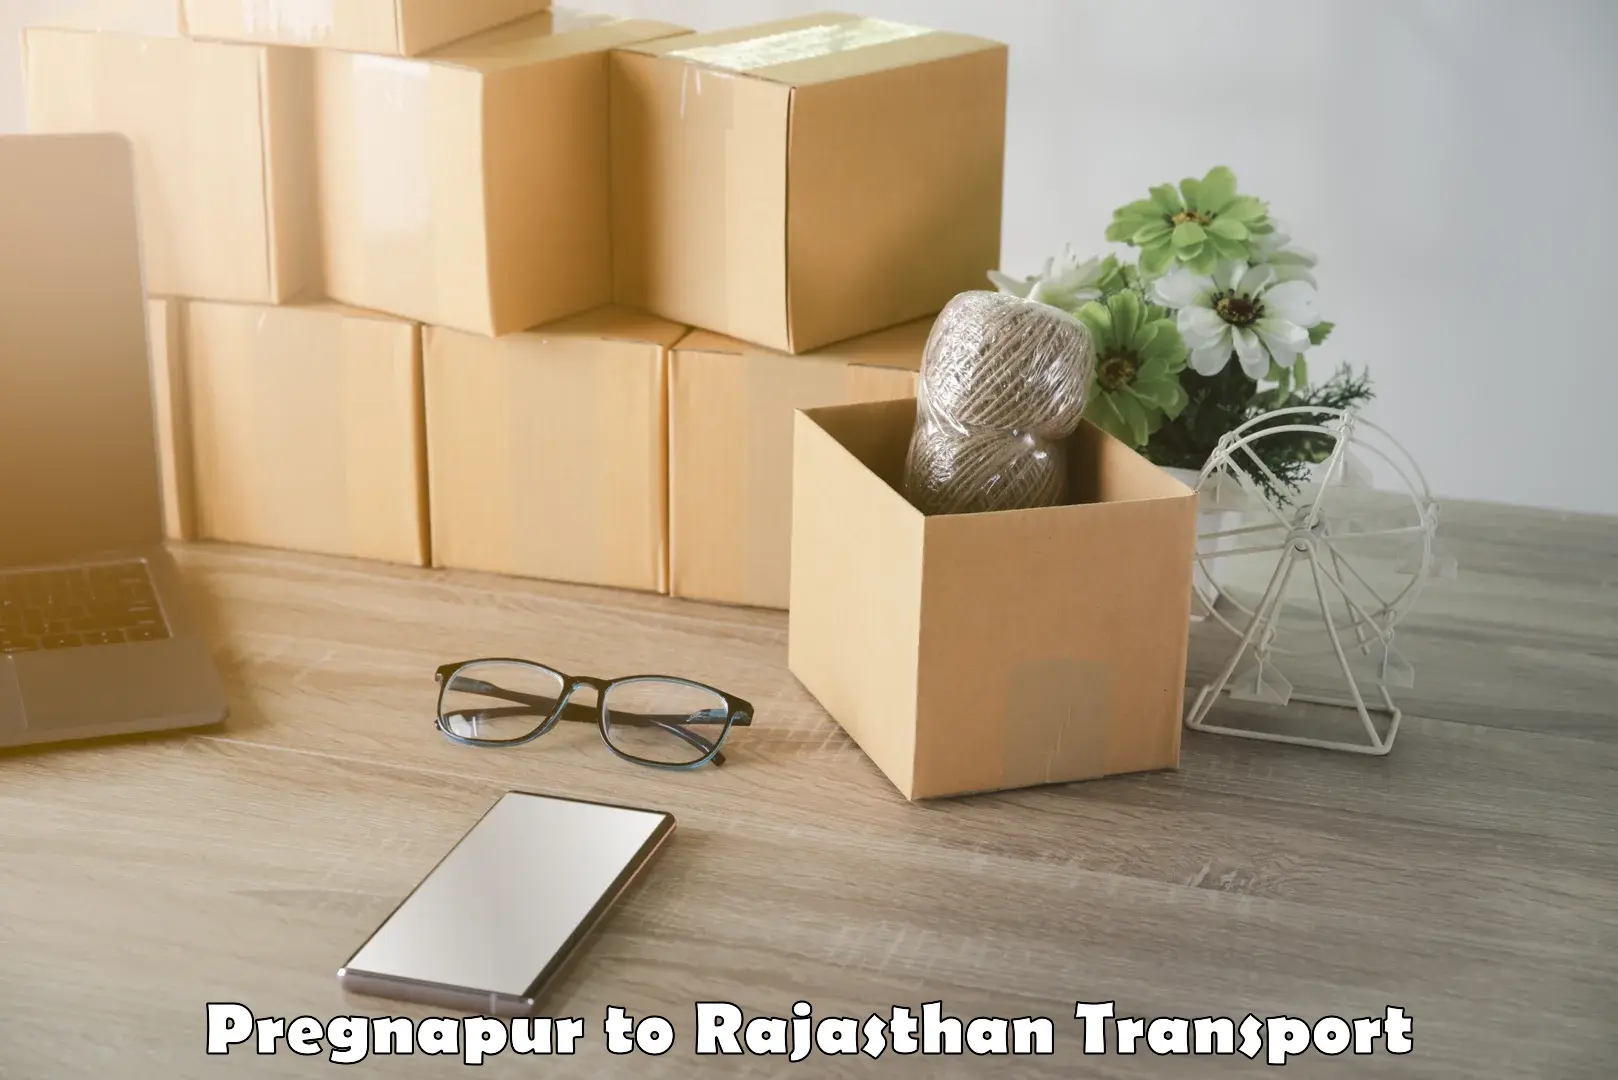 Package delivery services Pregnapur to Raipur Pali